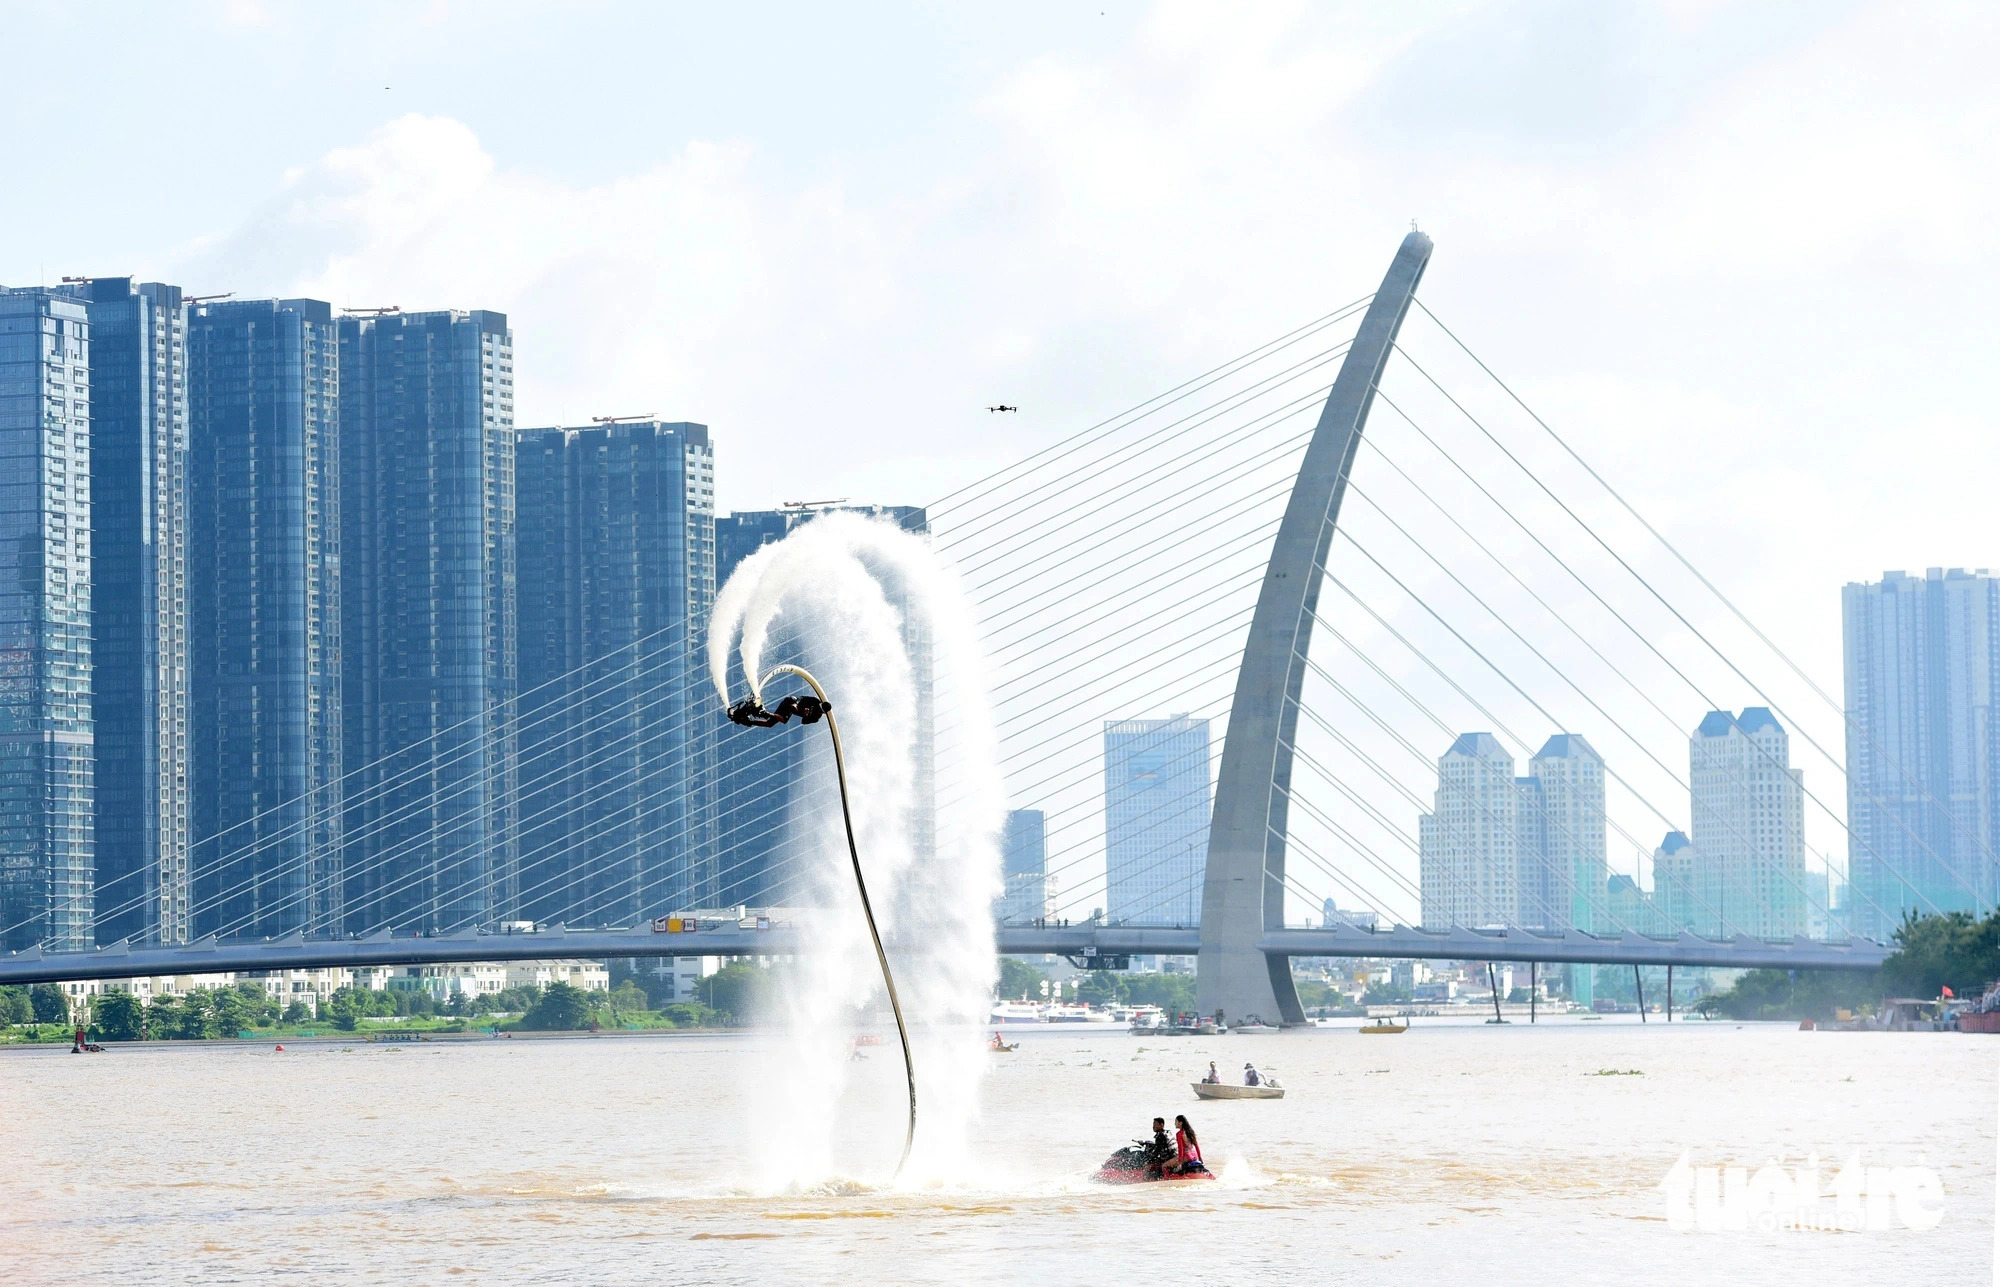 22 waterways activities to be featured in 2nd Ho Chi Minh City River Fest